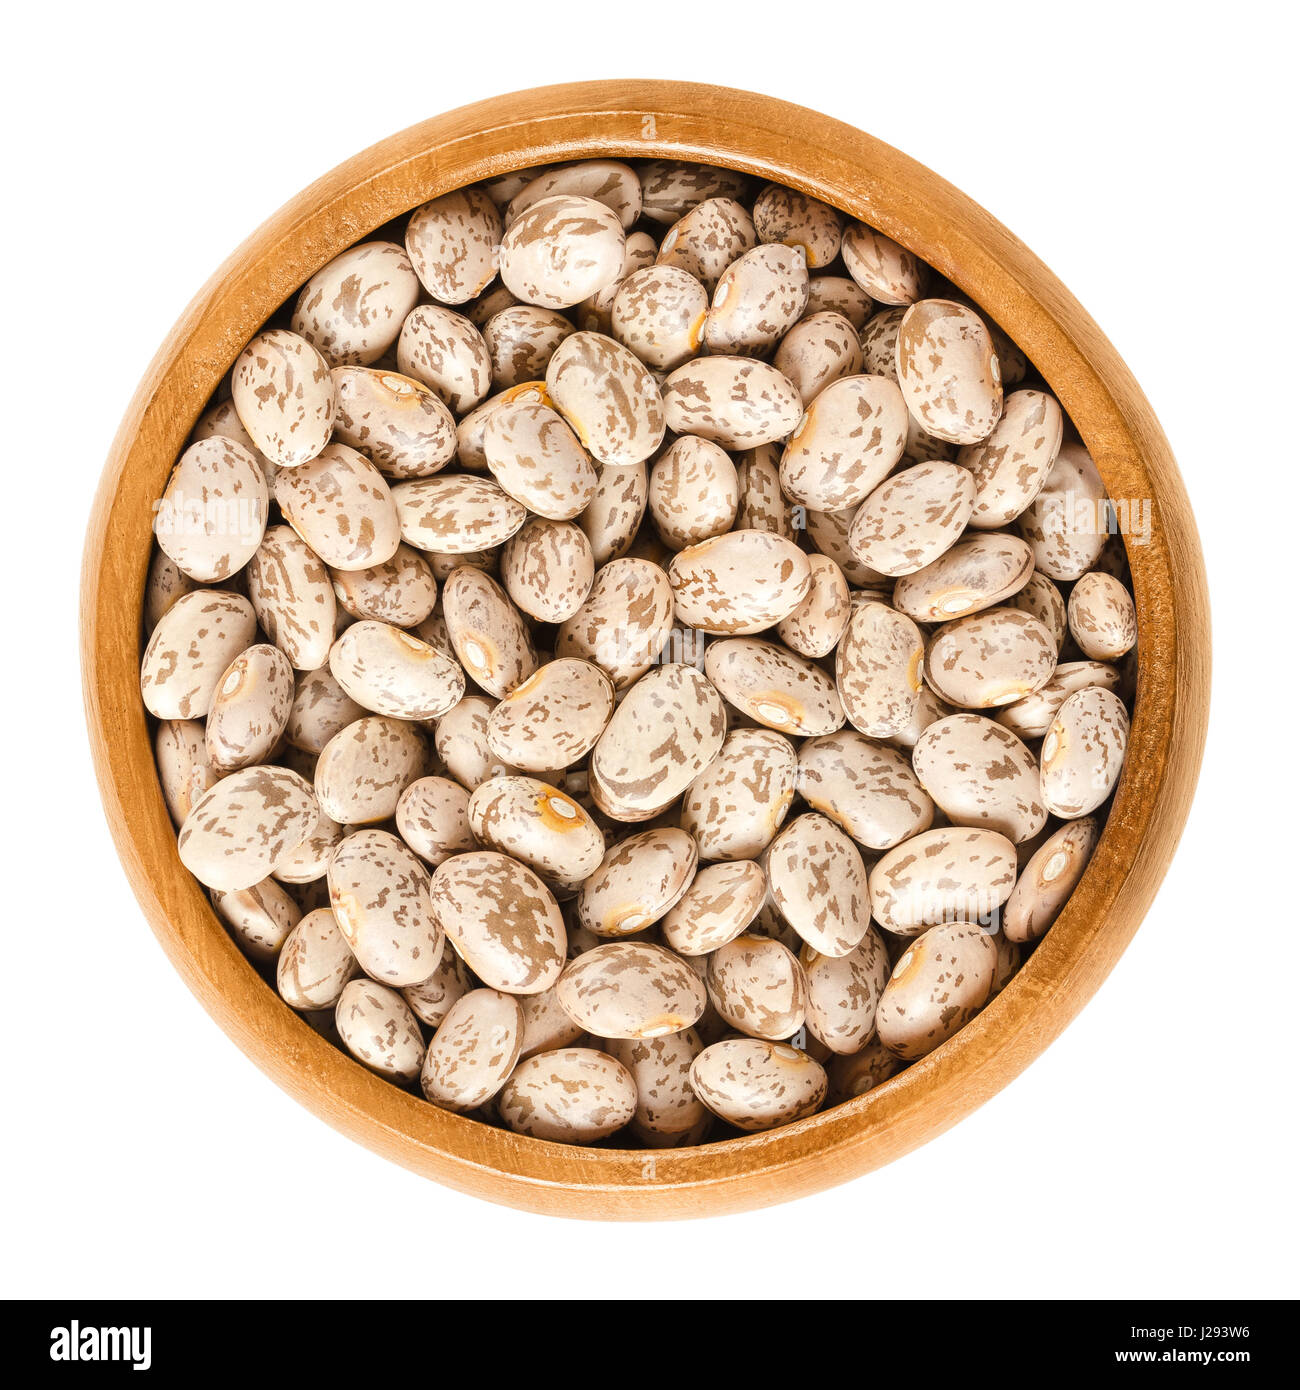 Pinto beans in wooden bowl. Dried variety of the common bean Phaseolus vulgaris. Speckled beans. Most popular bean in USA and Mexico. Stock Photo